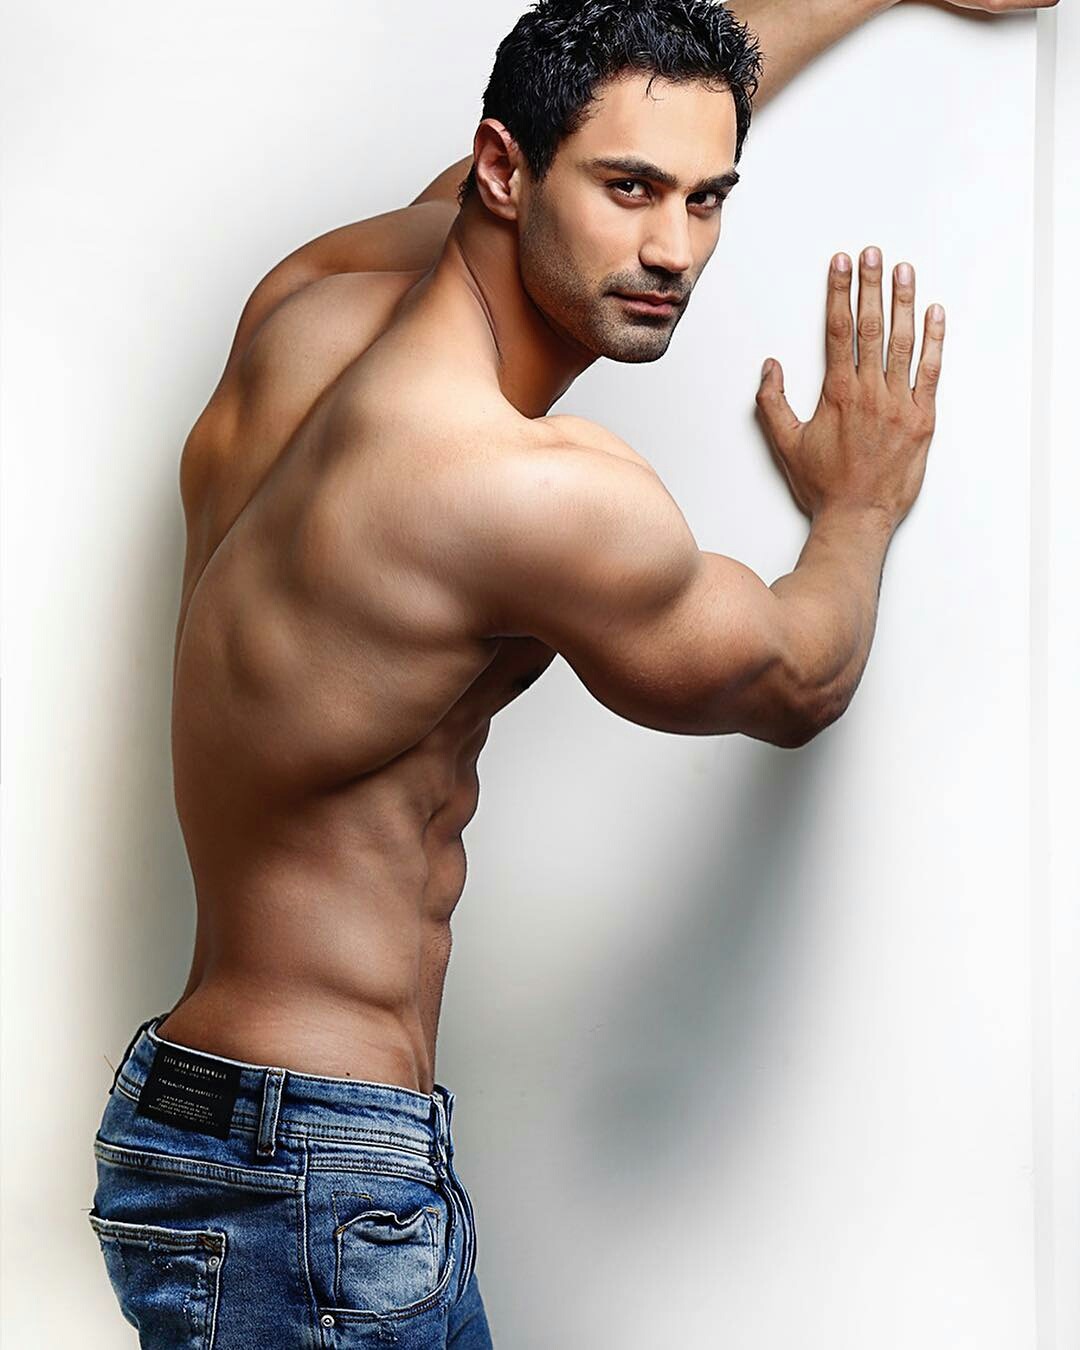 Indian male model in bed, in underwear, shirtless... yass! 